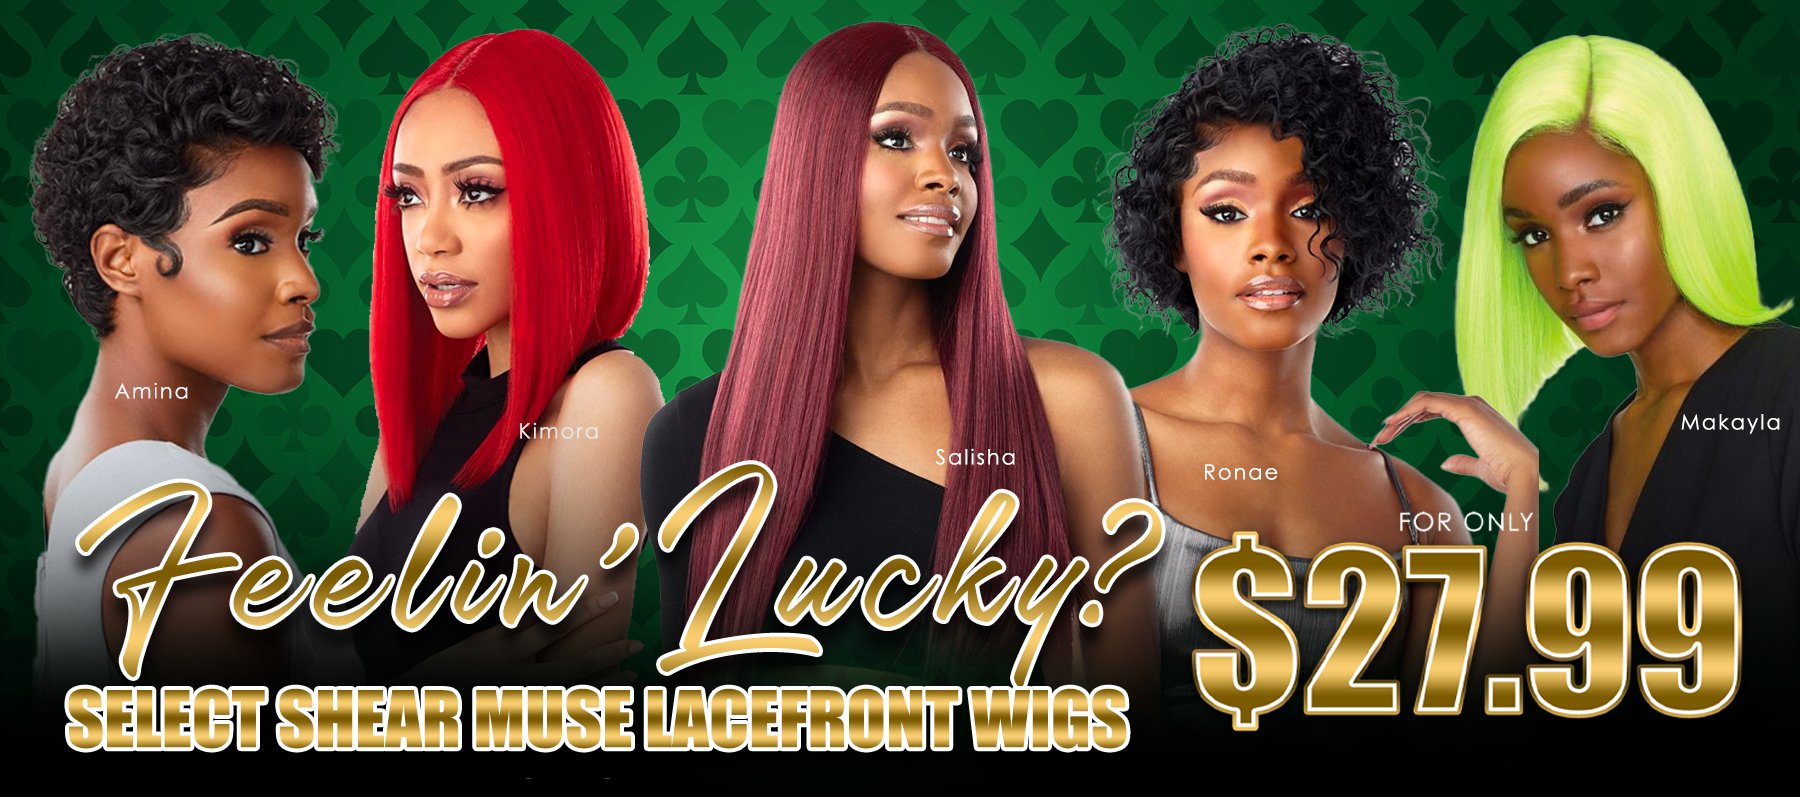 $27.99 Sensationnel Shear Muse Lace Front Wig Sale from March 16 - March 23 - Beauty Exchange Beauty Supply